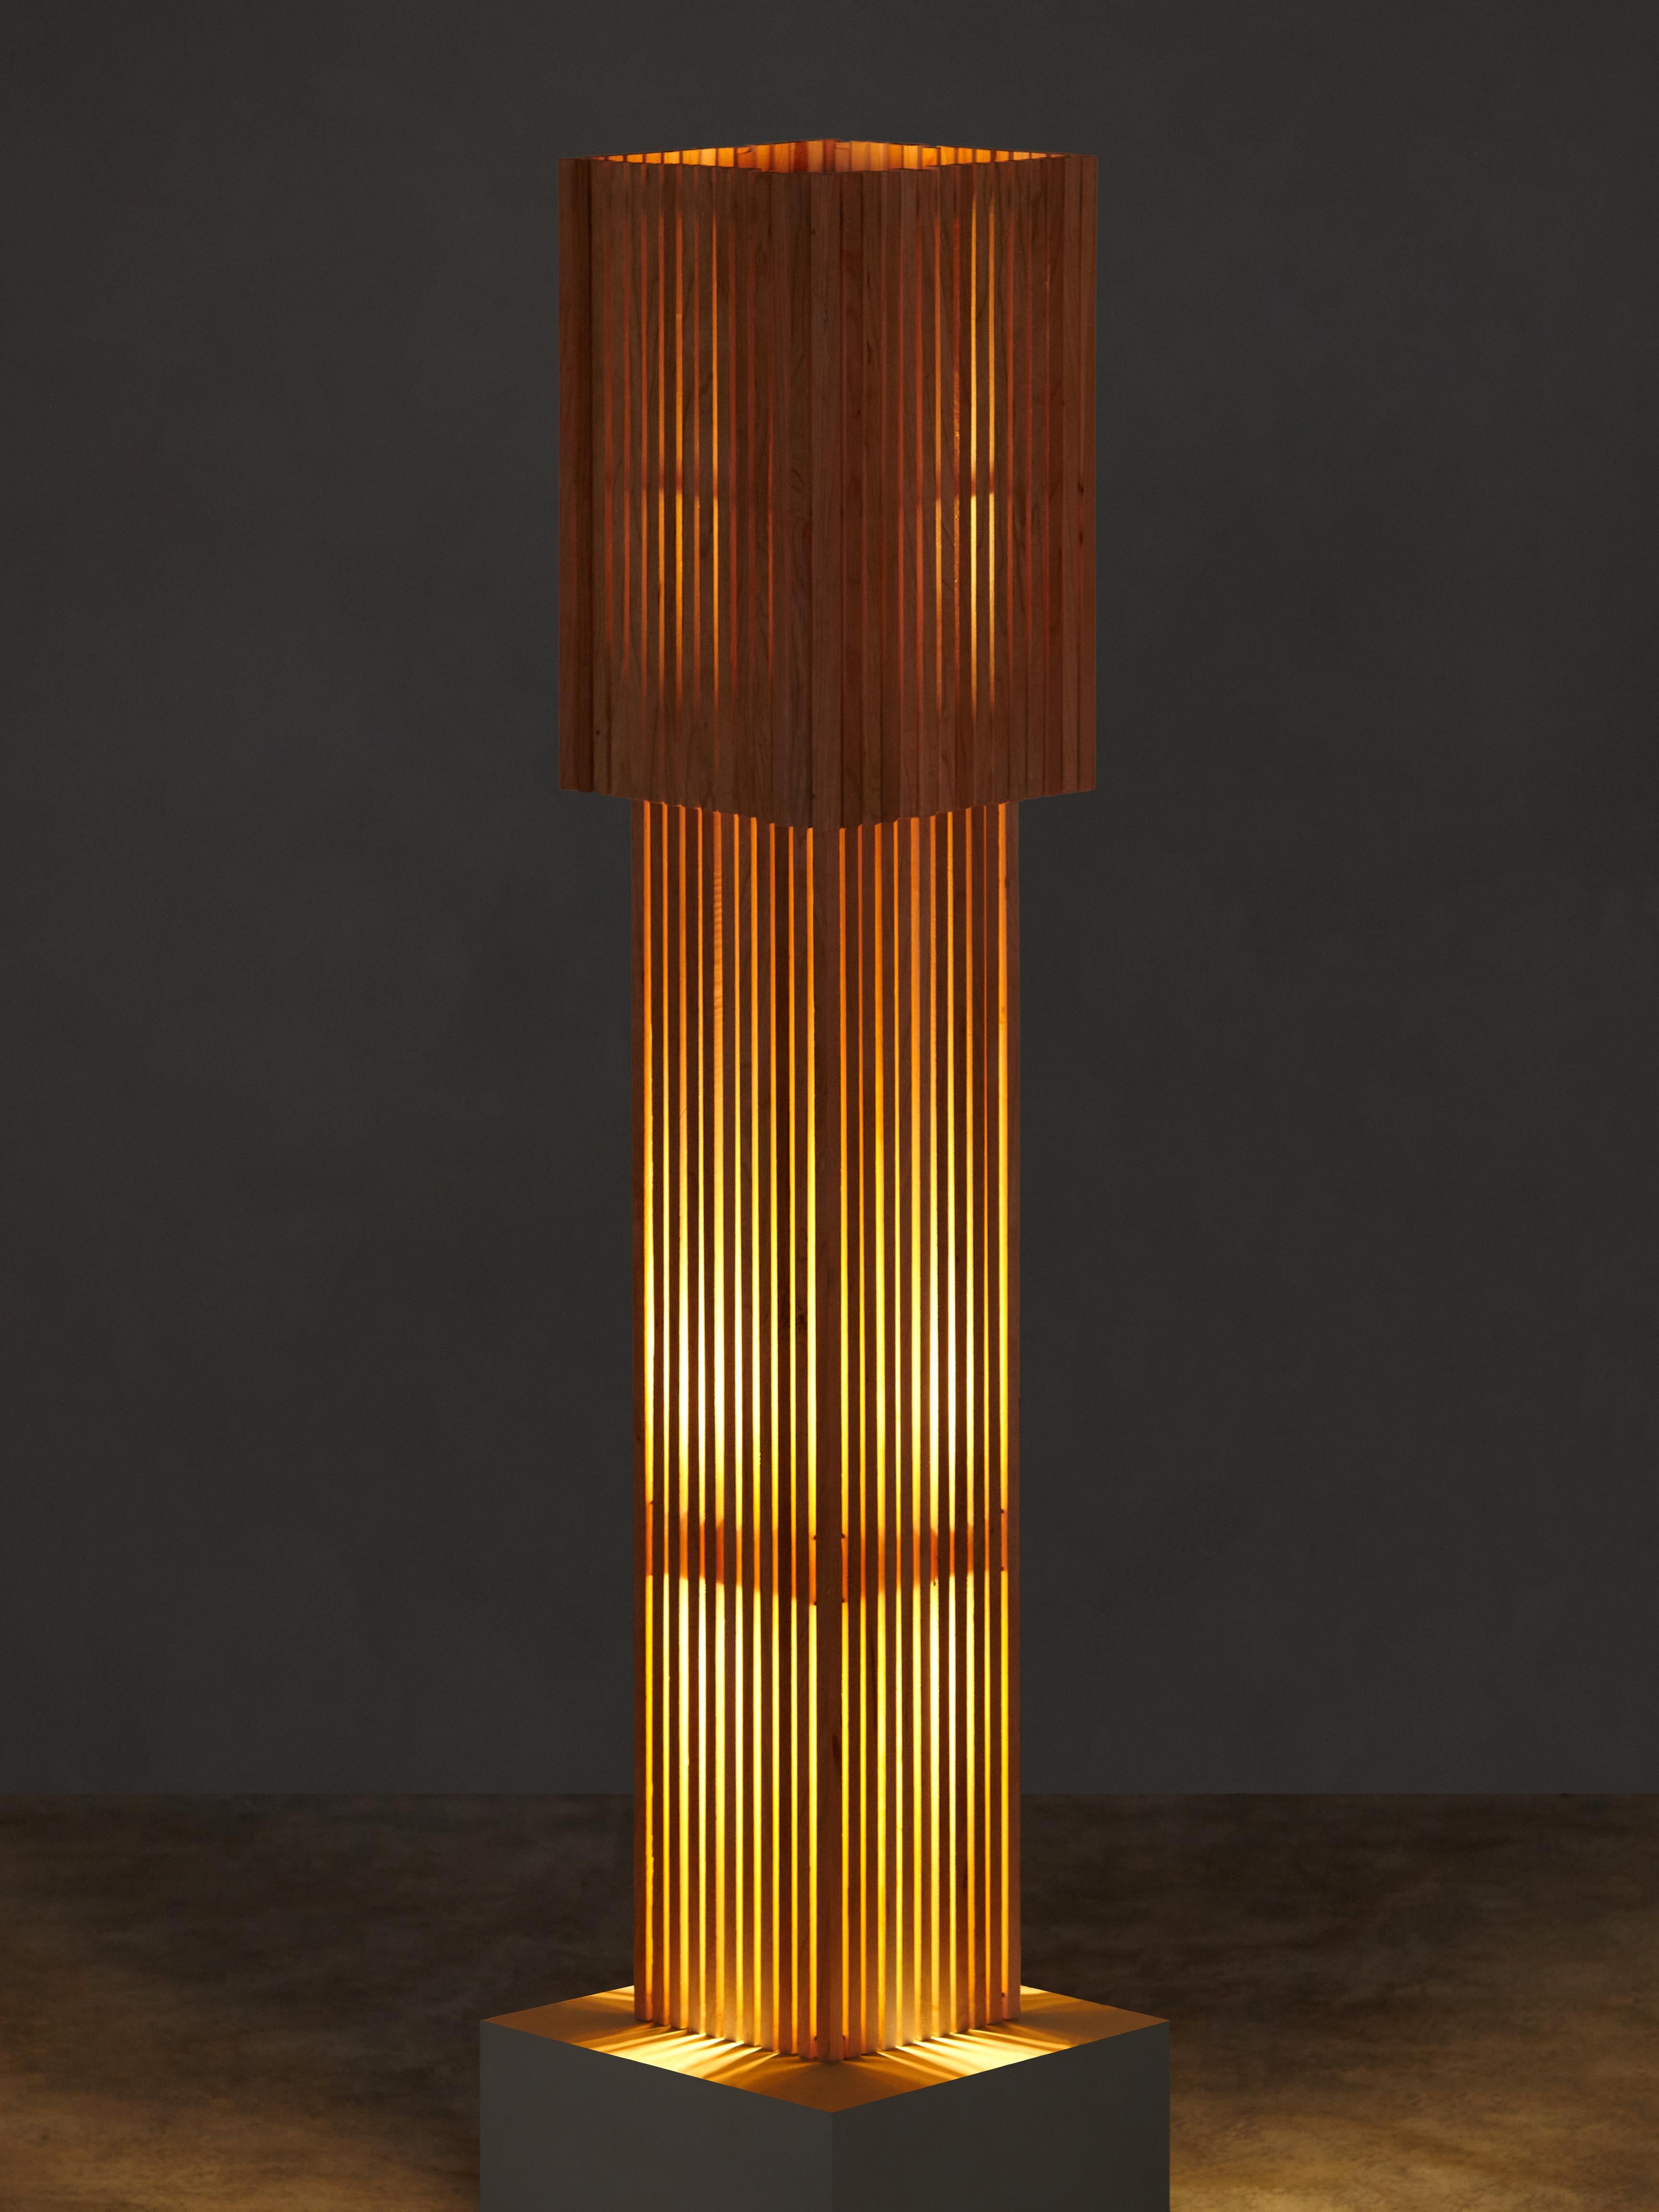 Hand-brushed wooden dowels both block and direct the lamp’s concealed LED bulb, casting an uneven glow through the vertical strips of the lamp’s body. The removable top-shade functions as a manual dimmer, allowing the lamp to transform in shape and